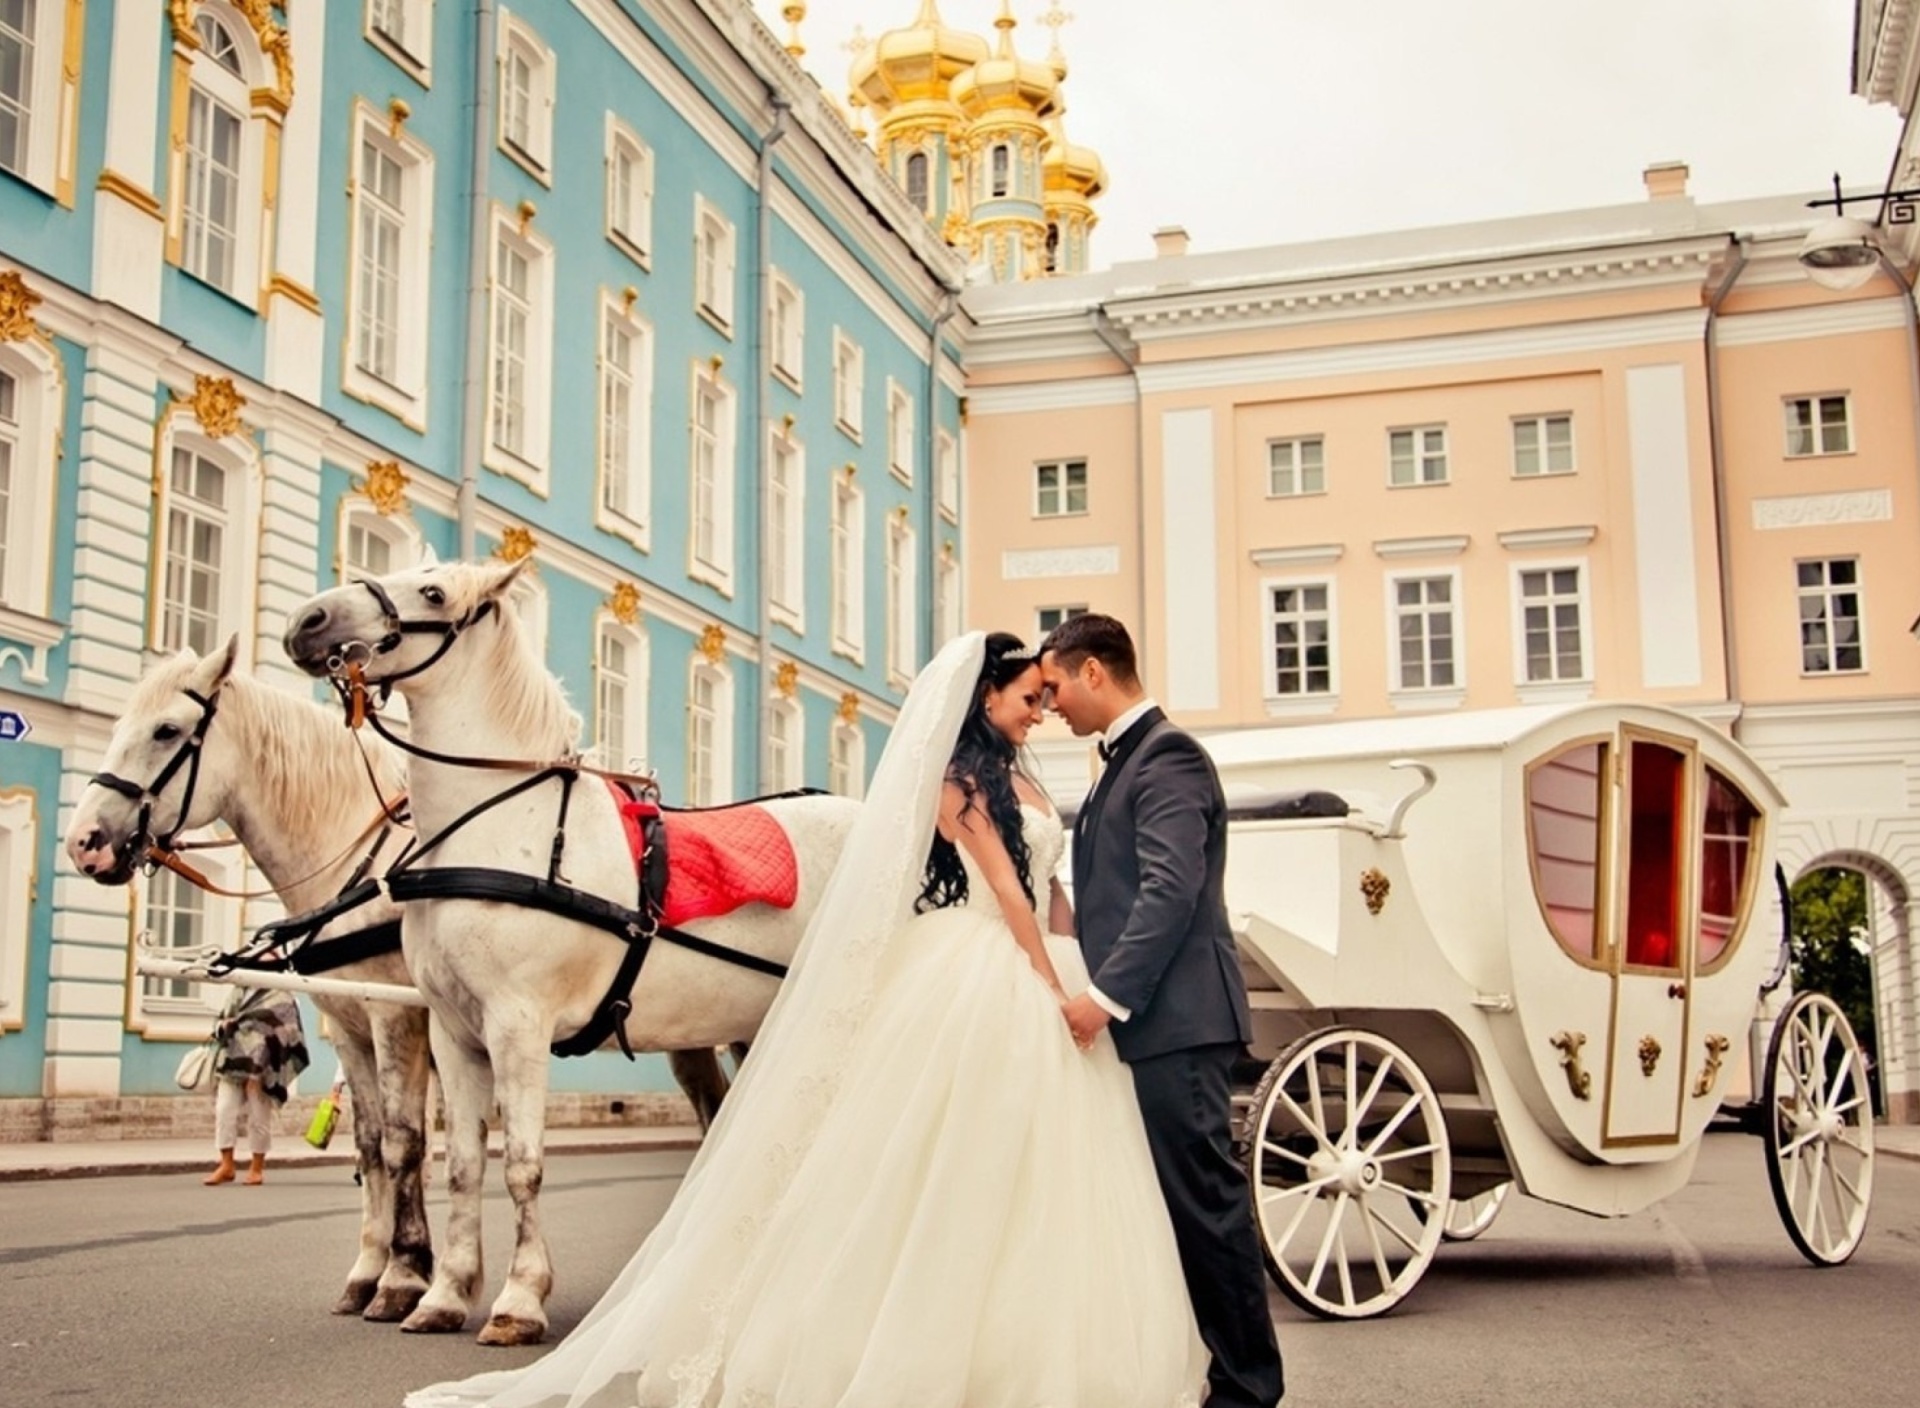 Wedding in carriage wallpaper 1920x1408